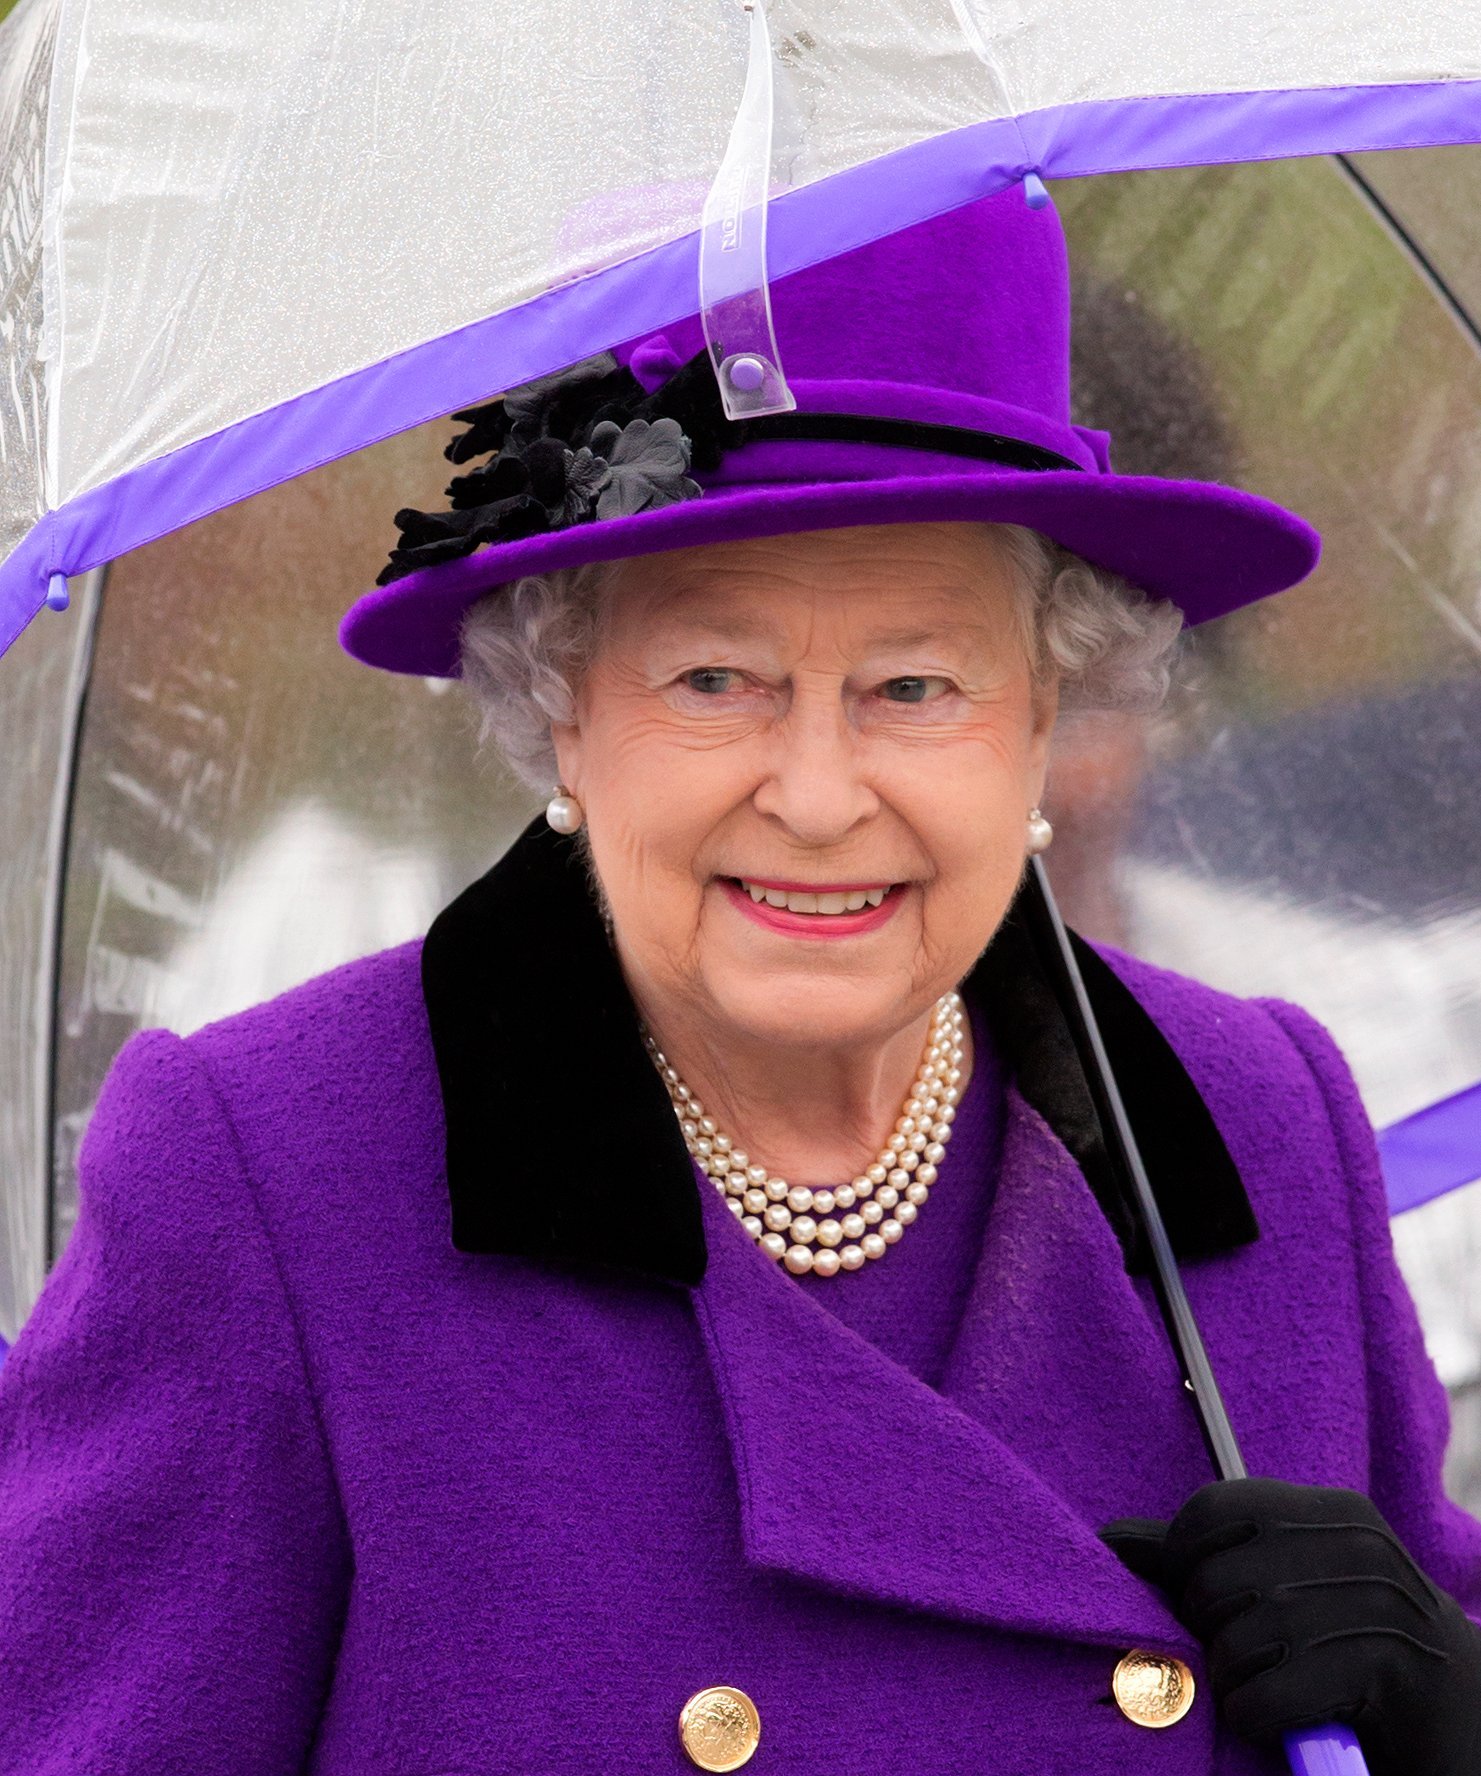 Queen Elizabeth II attends the opening of the newly developed Jubilee Gardens on October 25, 2012 in London, England. | Photo: Getty Images